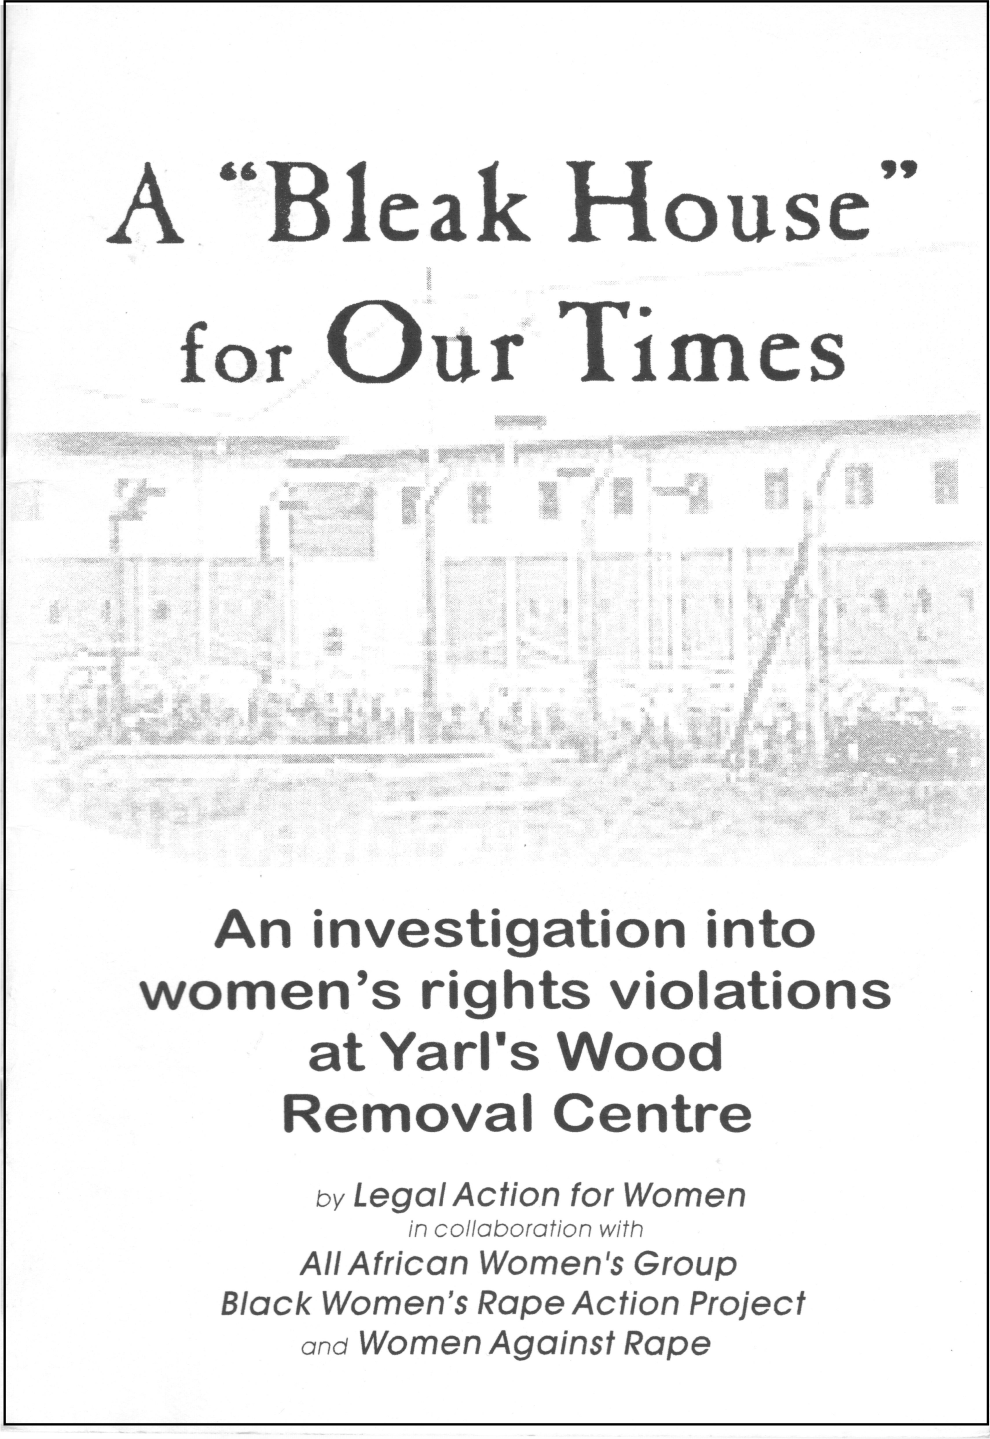 A Bleak House for Our Times: an investigation into women's rights violations at Yarl's Wood Removal Centre